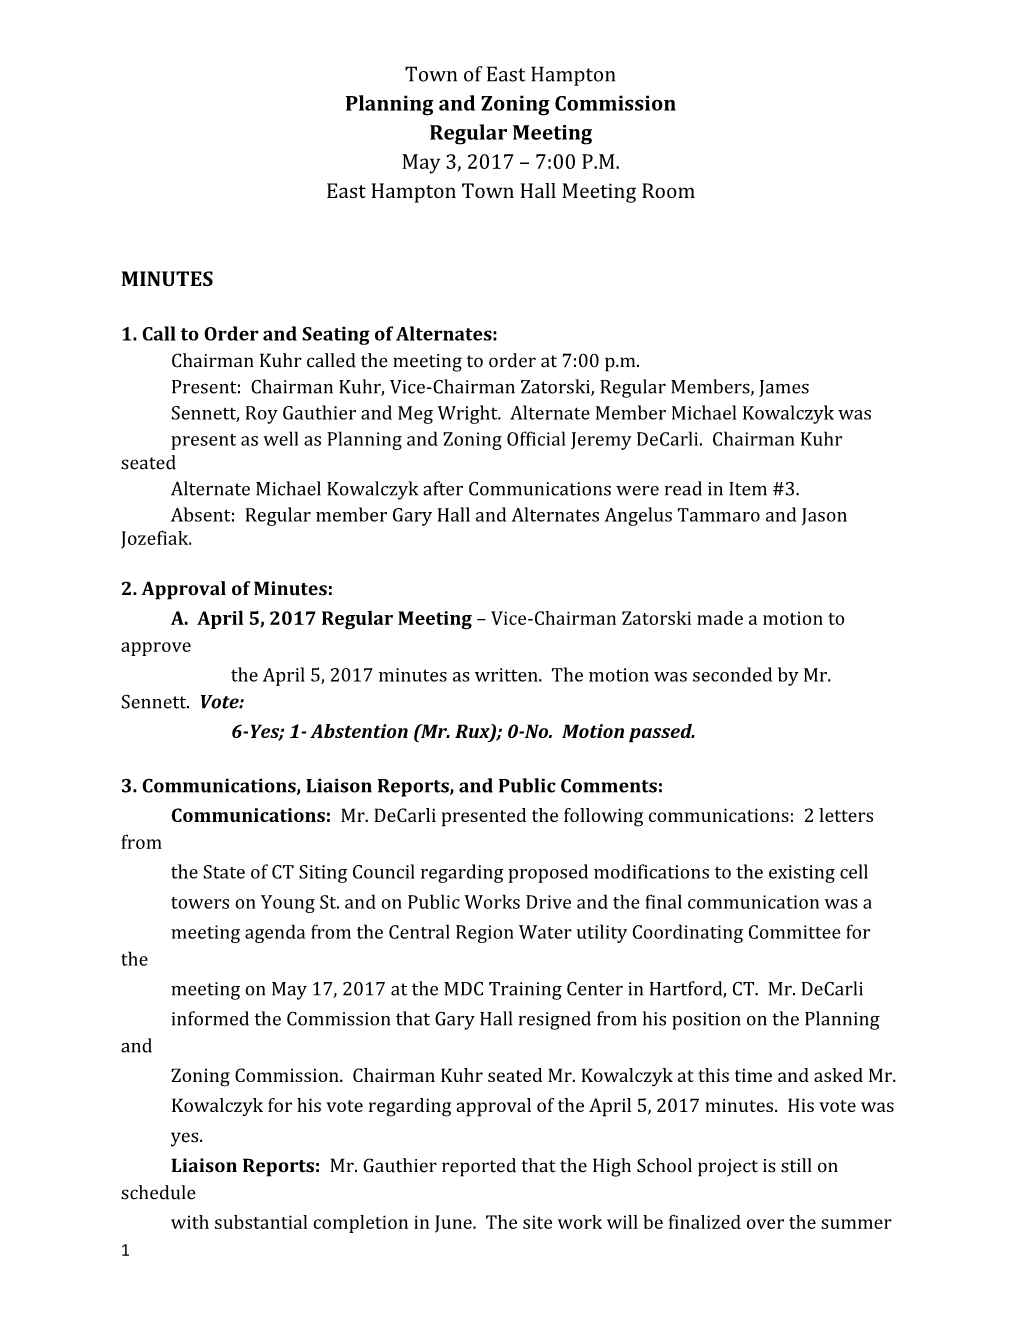 Planning and Zoning Commission s1